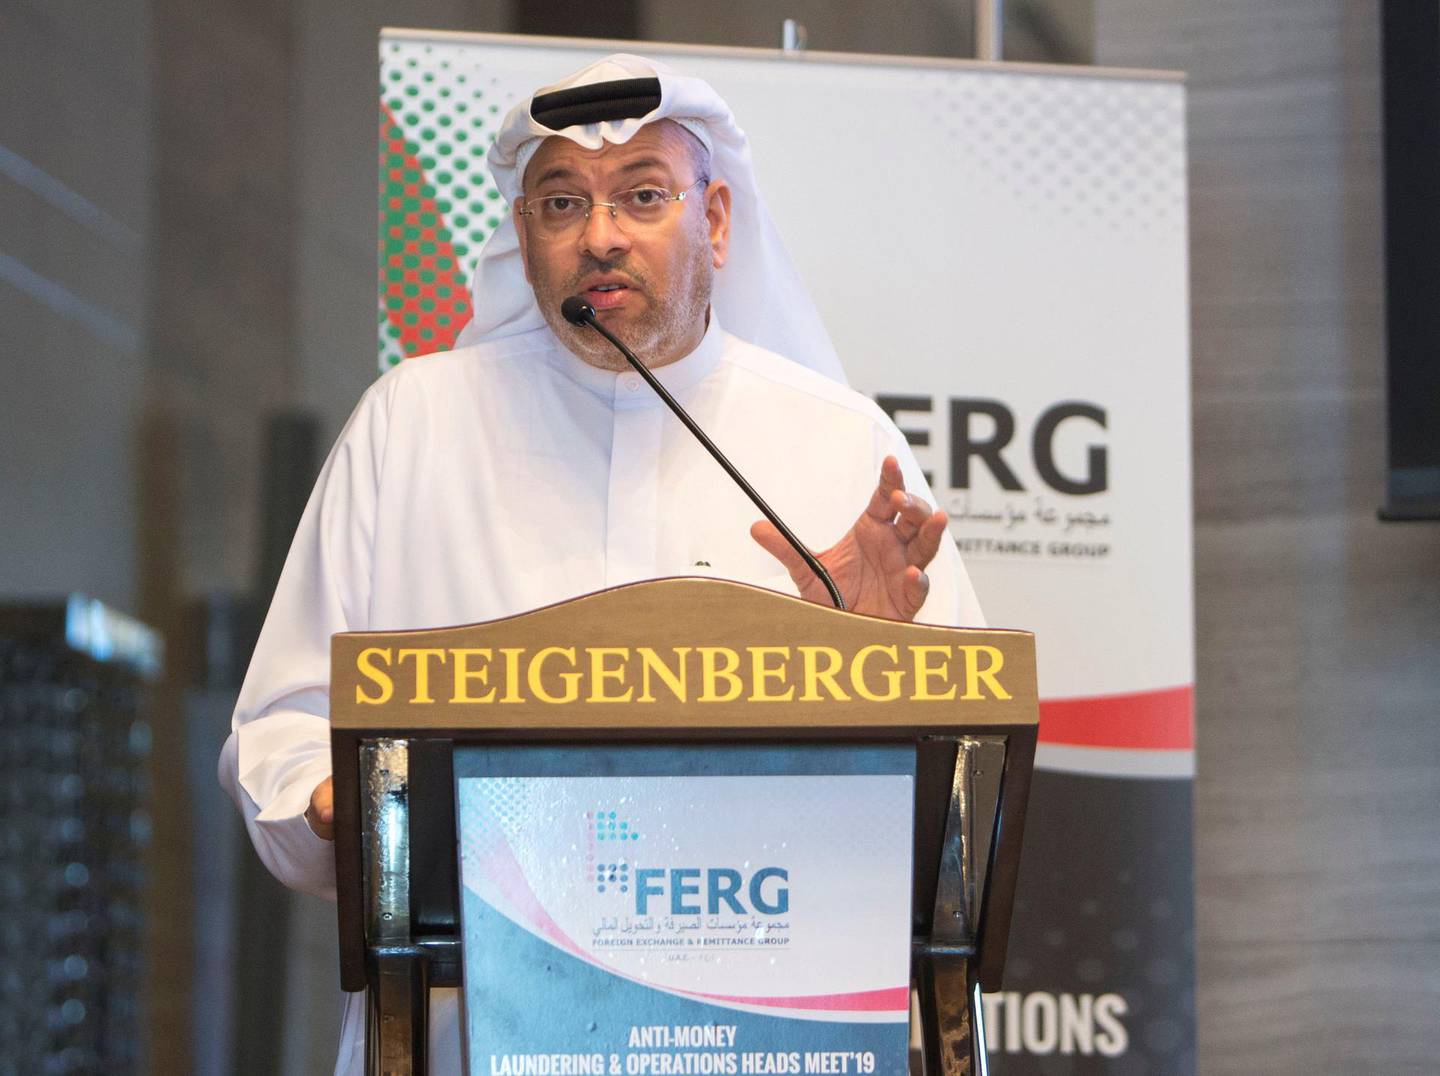 DUBAI, UNITED ARAB EMIRATES - Osama Al Rahma, FERG Vice Chairman at Anti-Money Laundering and Operations Heads Meet 19 at Steigenberger Hotel.  Leslie Pableo for The National for Hada El Sawy's story